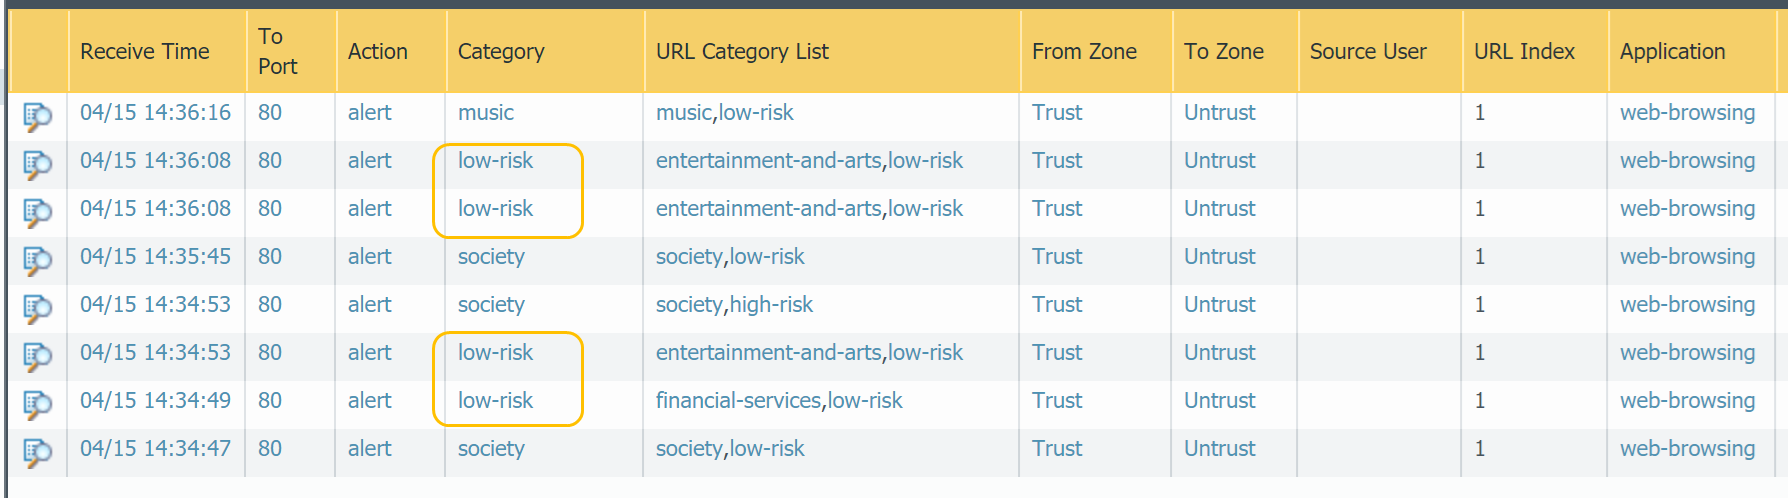 Risk Category shows in Category column